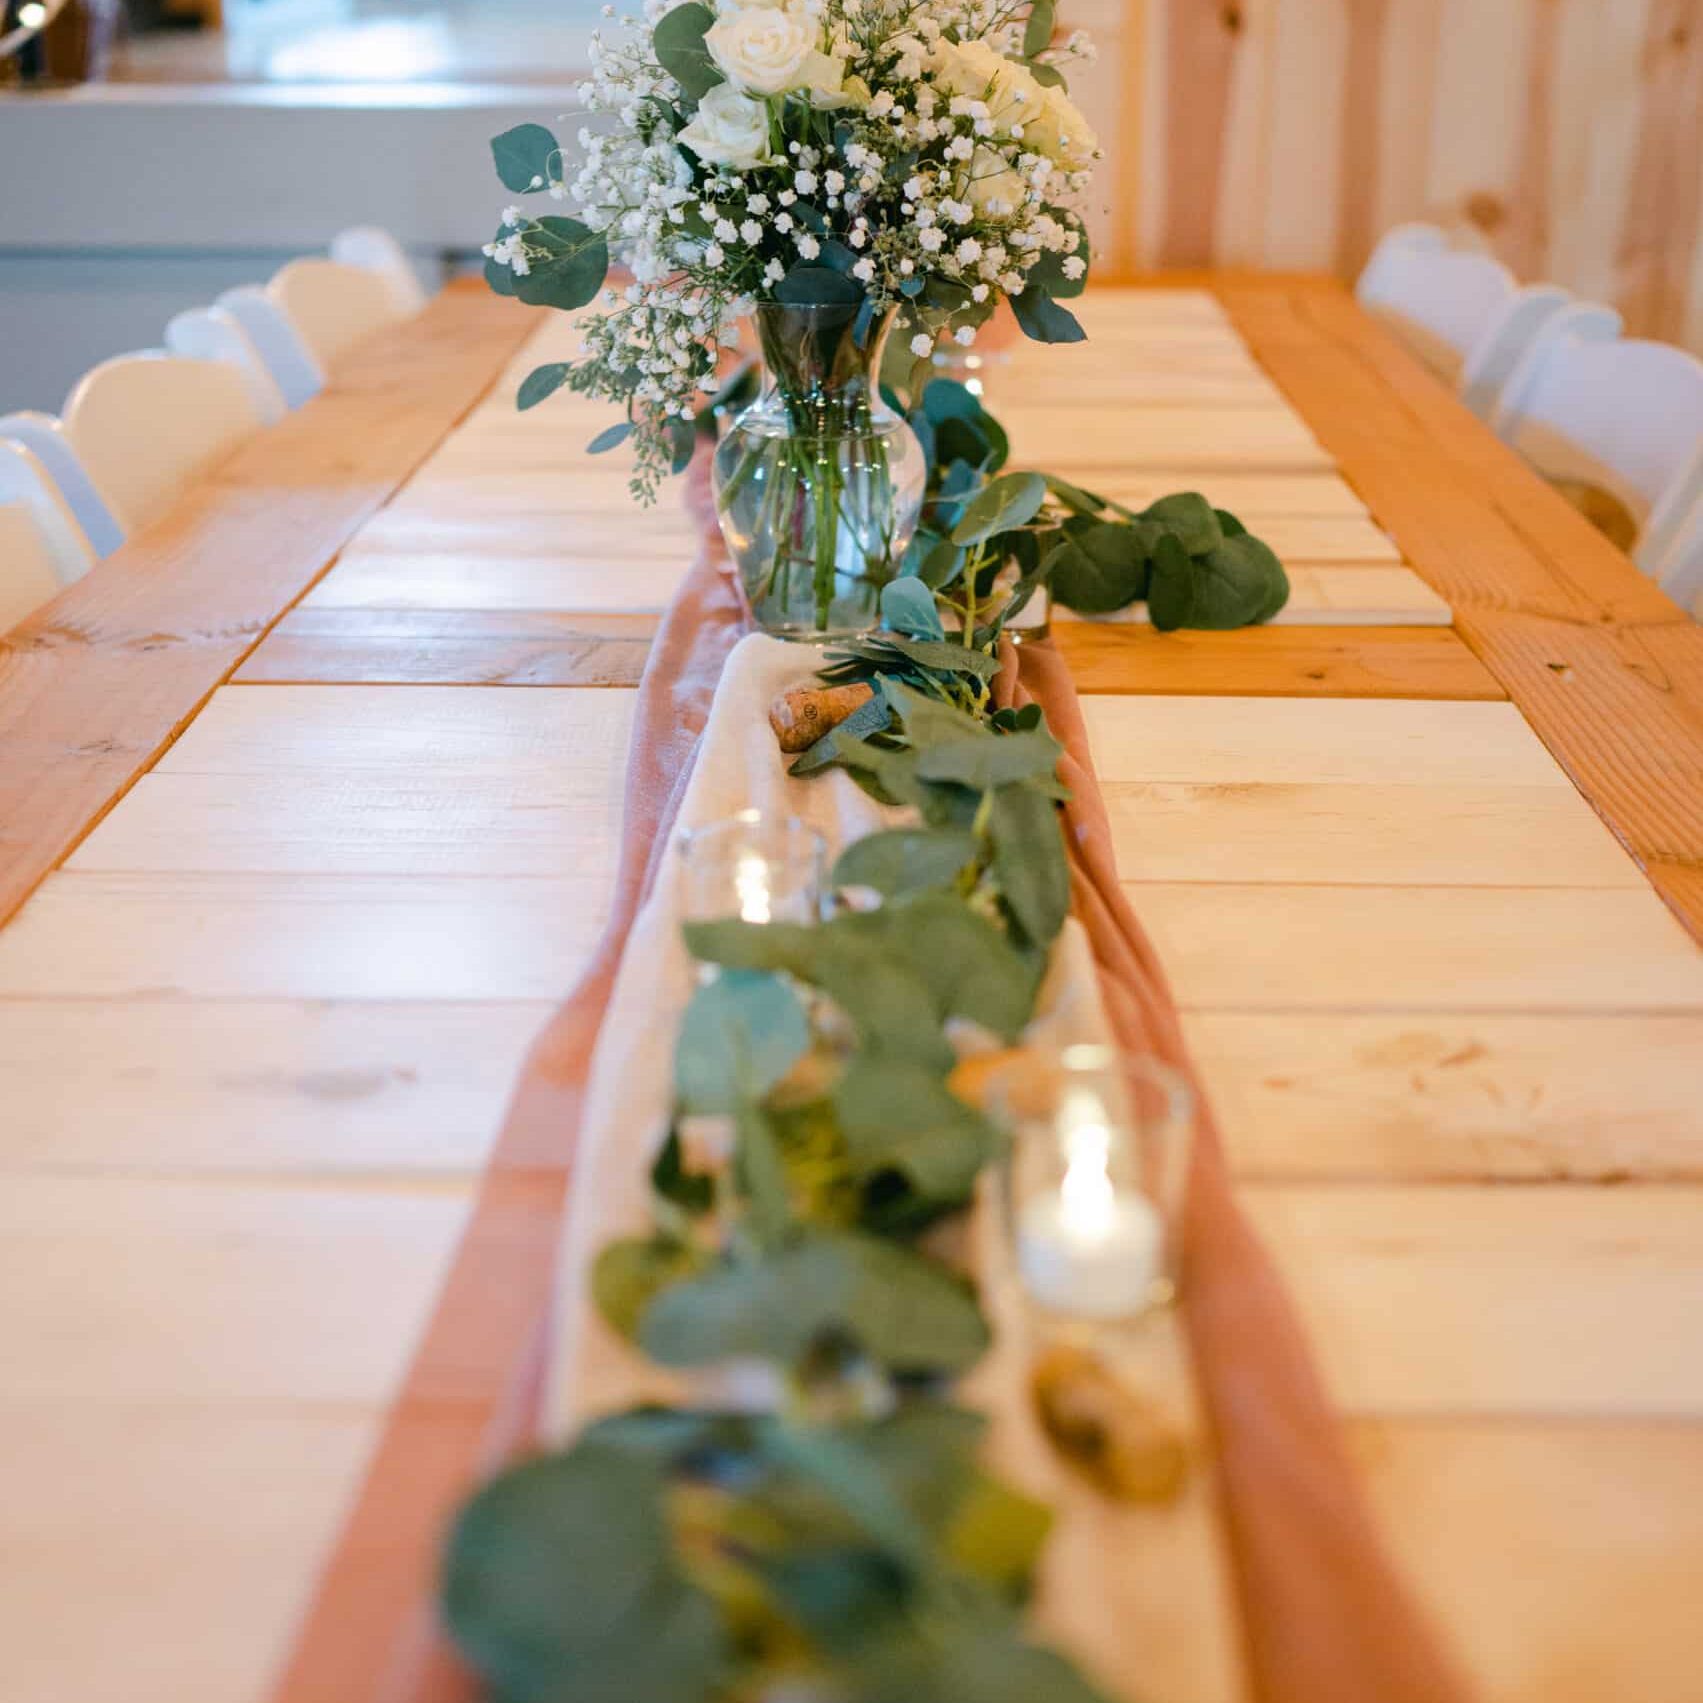 Reception table with white and green floral table runners and candles